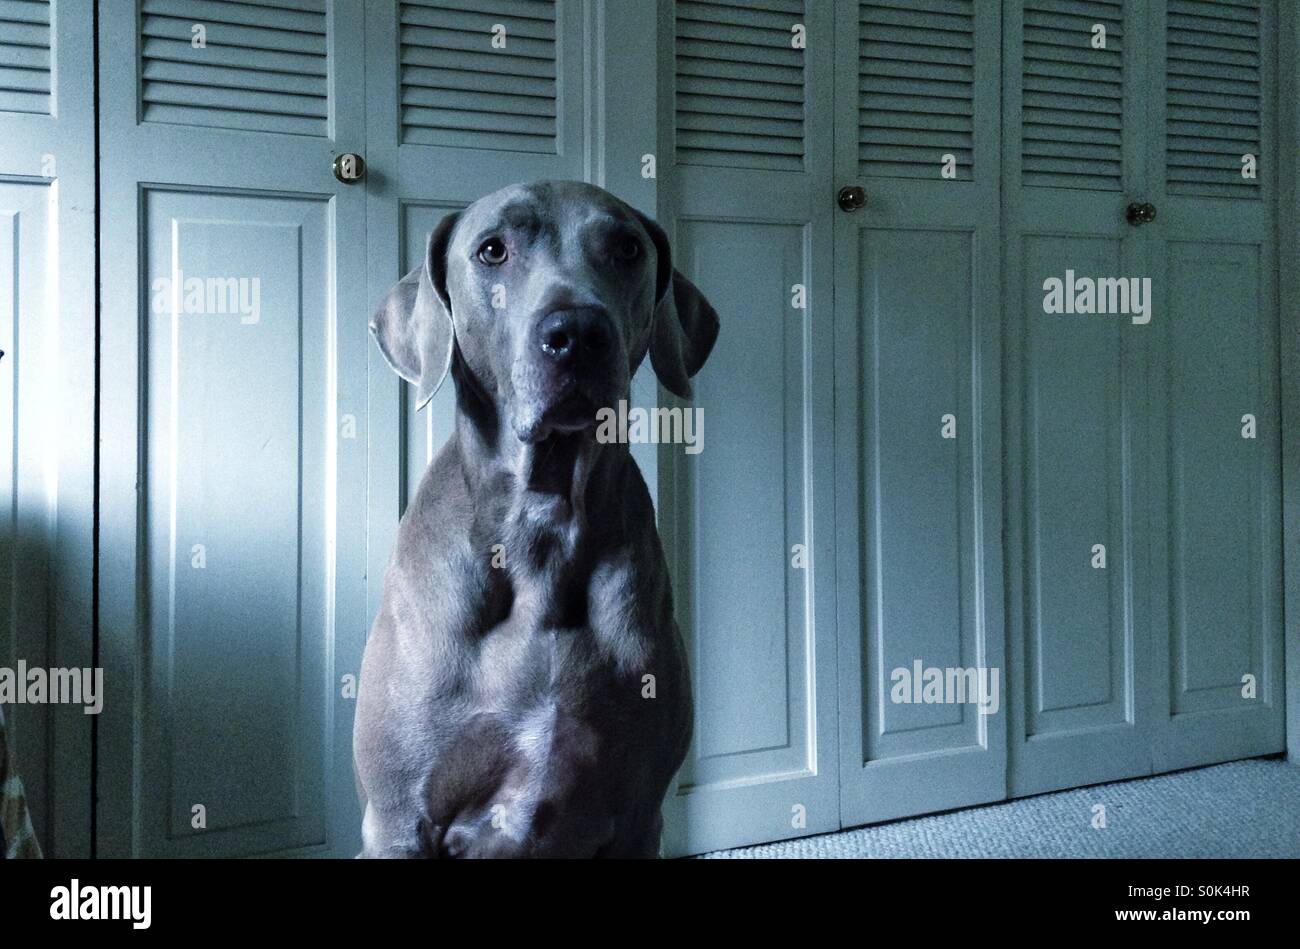 Adult Weimaraner dog sitting tall in front of wall of closet doors Stock Photo